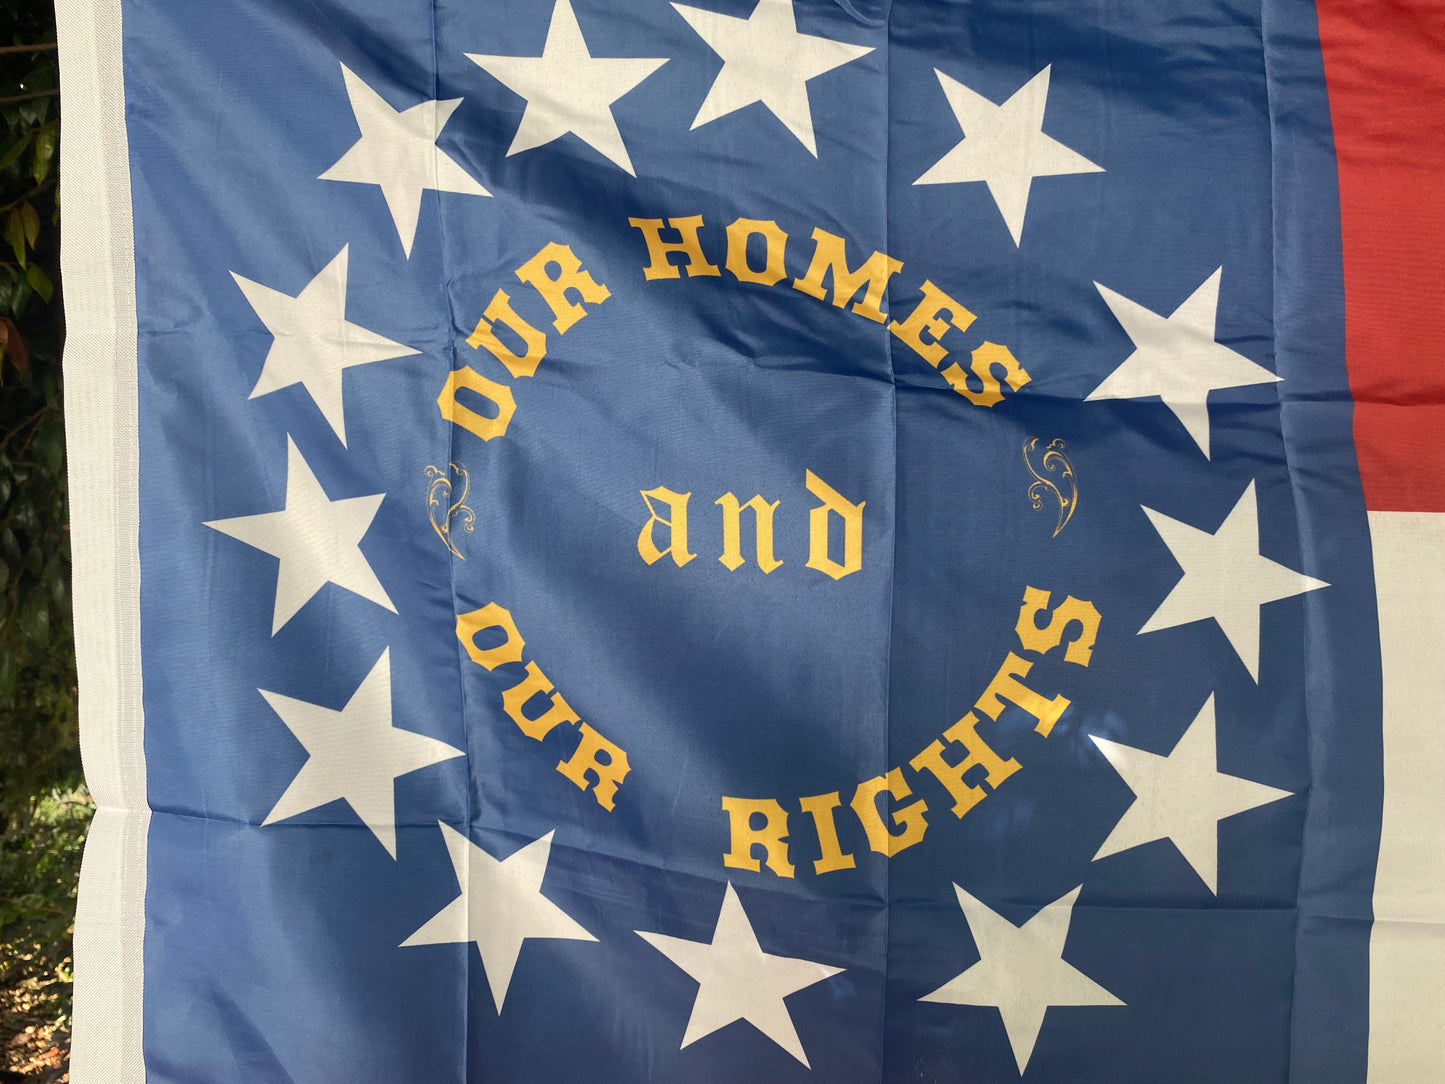 20th Texas Volunteers "Our Homes and Our Rights" House Flag